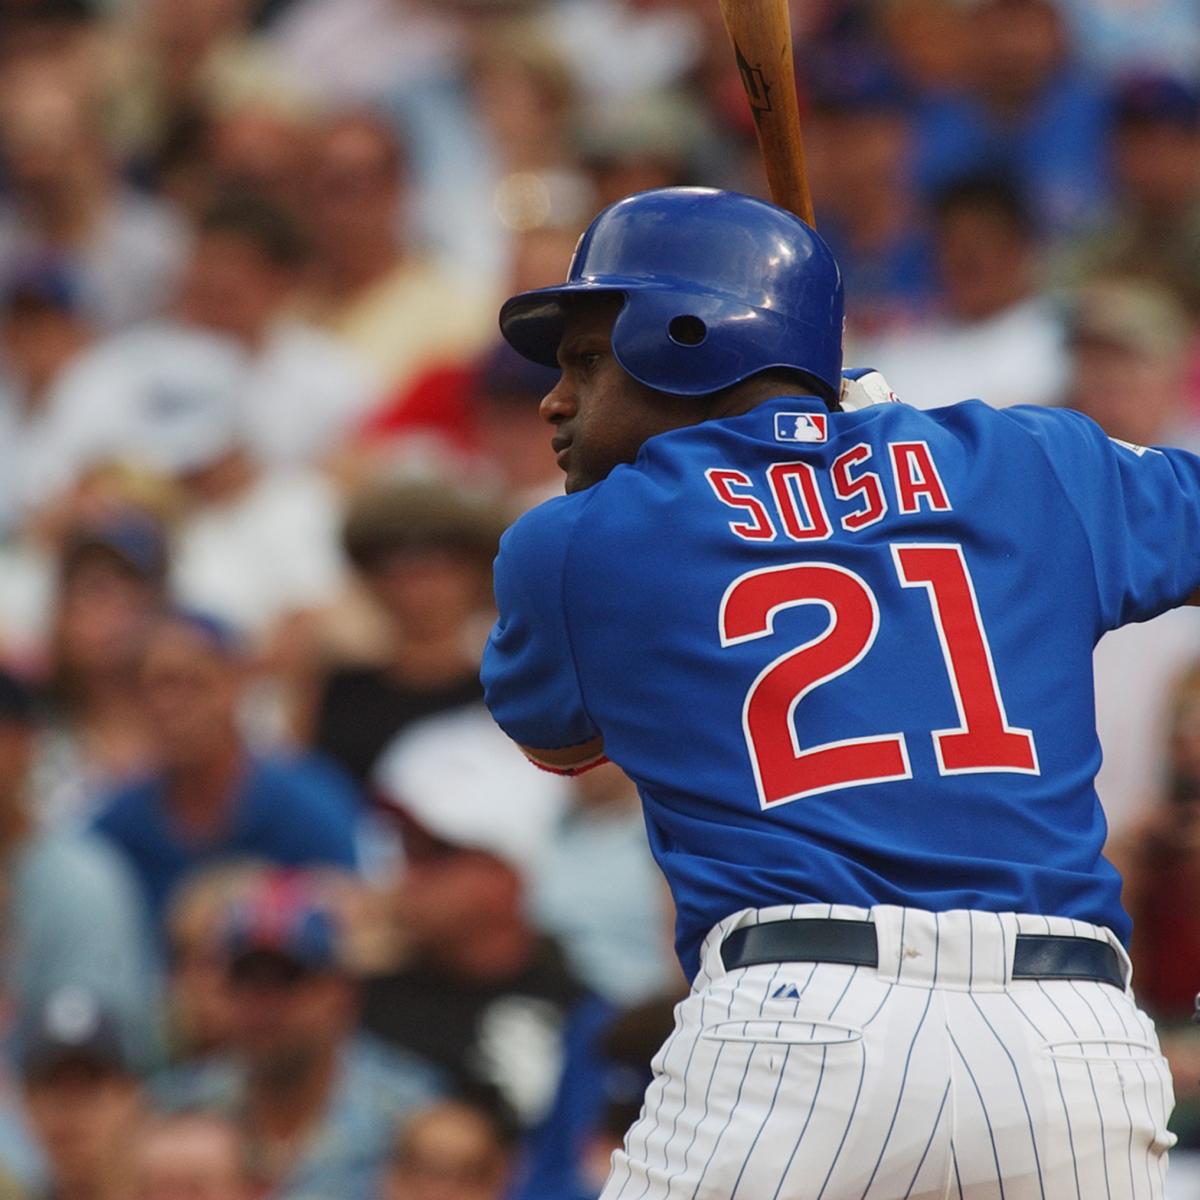 Sammy Sosa, Chicago Cubs during the record breaking season in 1998